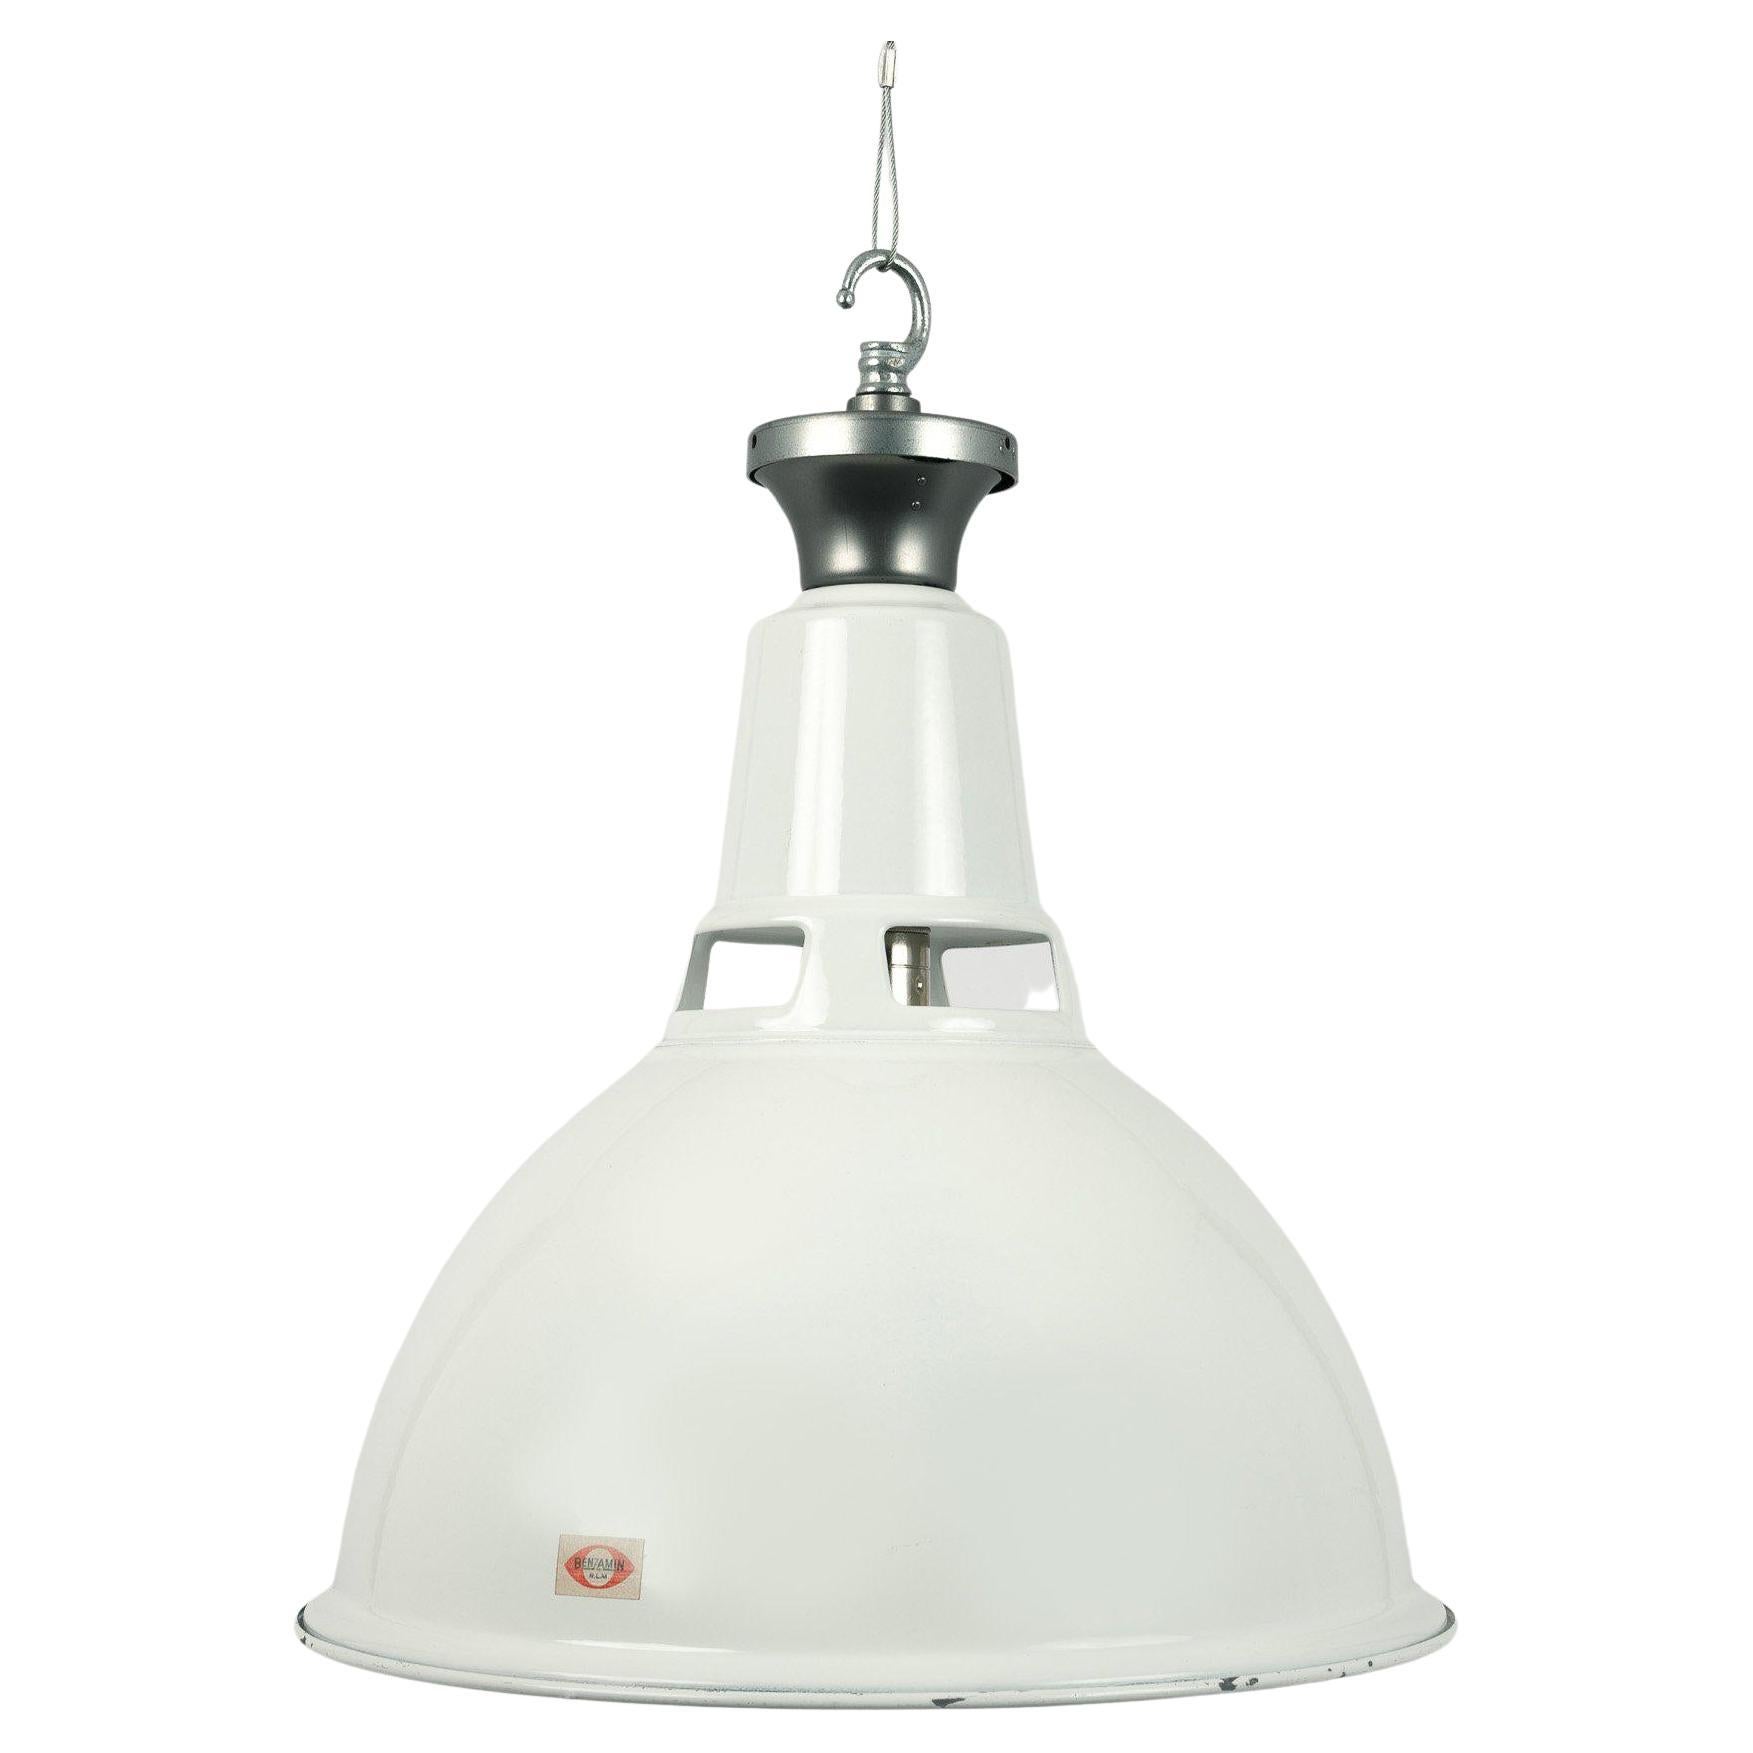 Large White Enamel Industrial Pendant with Vented Neck by Benjamin Electric